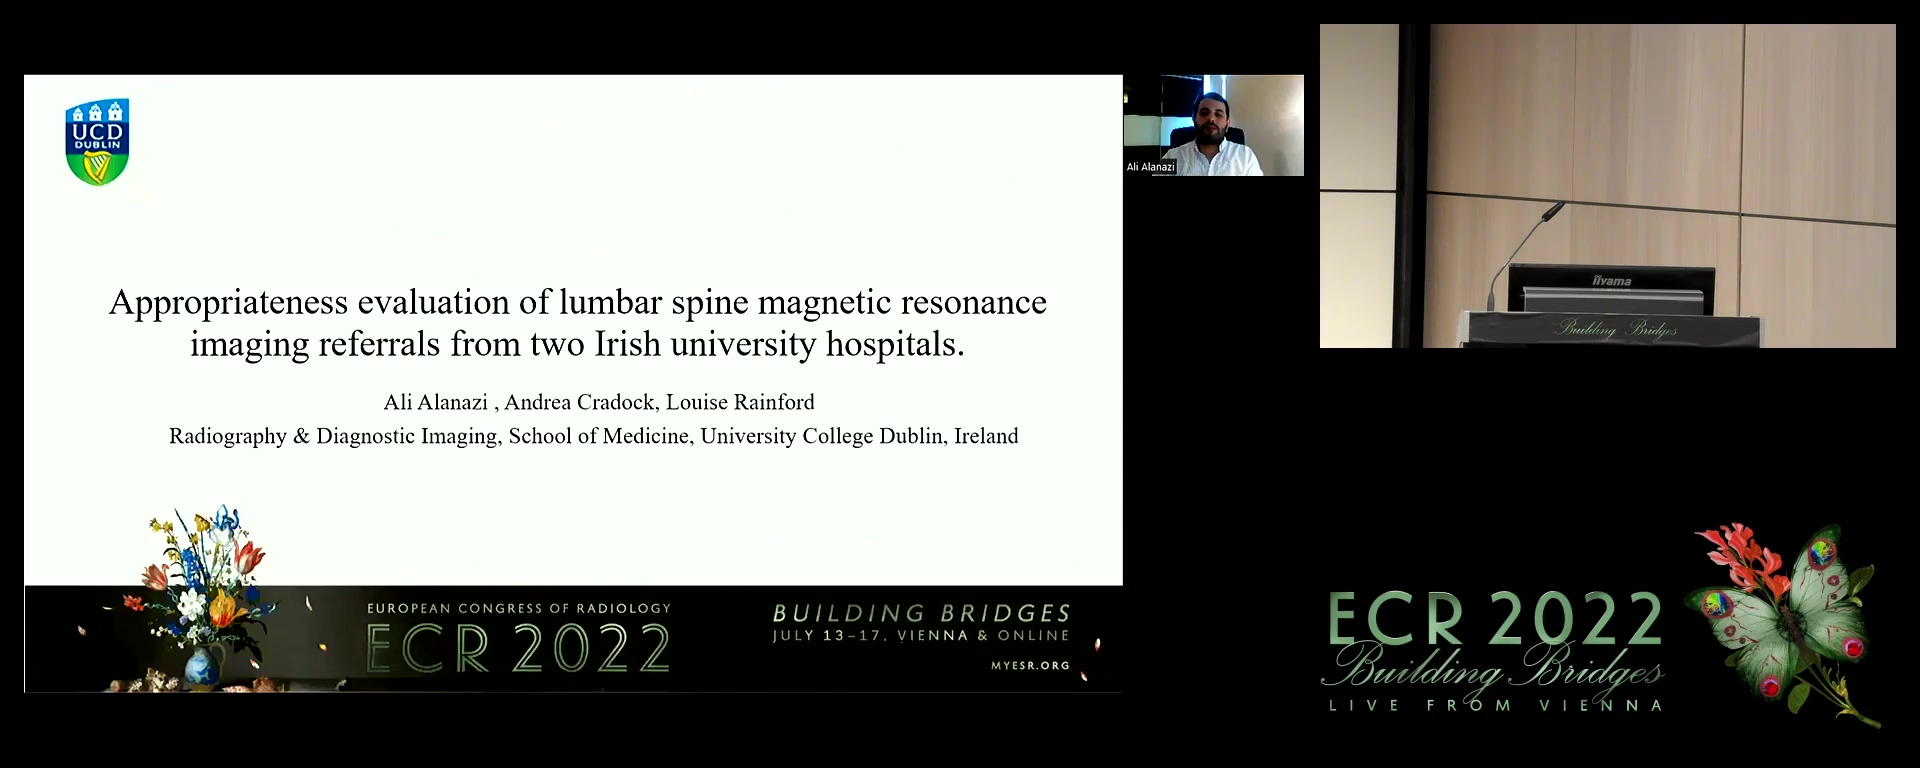 Appropriateness evaluation of lumbar spine magnetic resonance imaging referrals from two Irish university hospitals